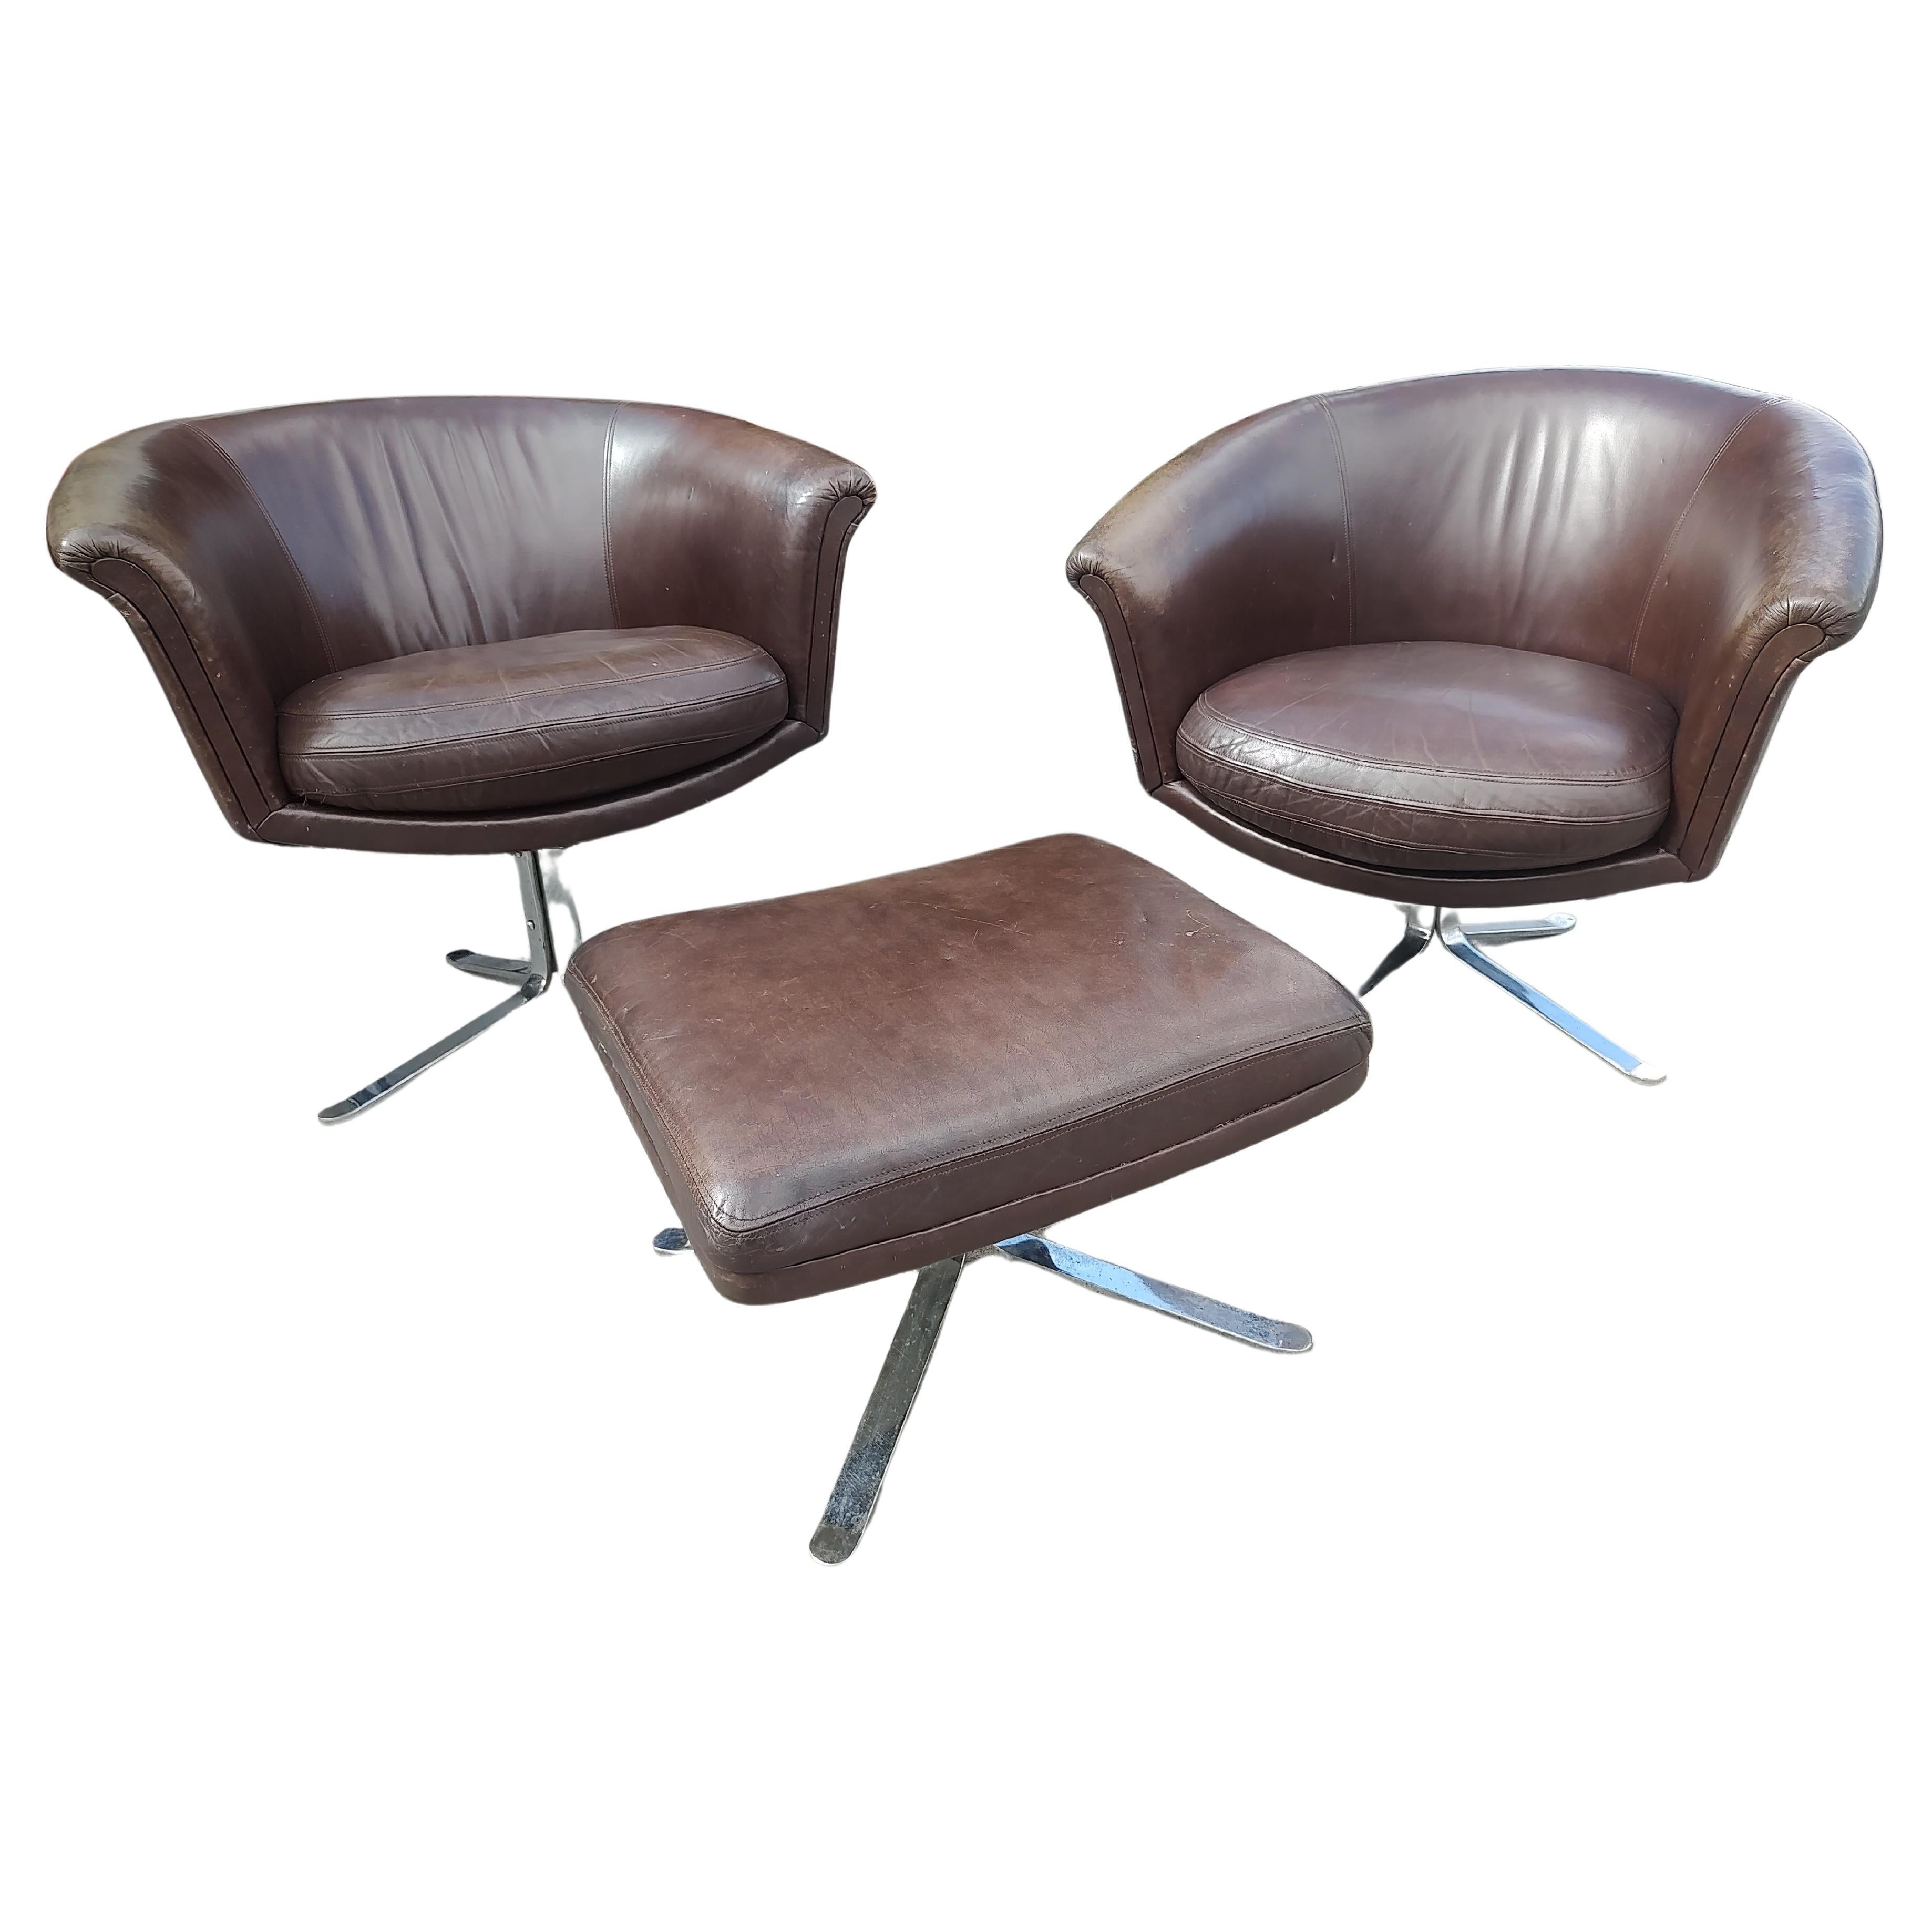 Pair of Mid Century Modern Leather Swiveling Lounge Chairs with an Ottoman C1965 For Sale 3